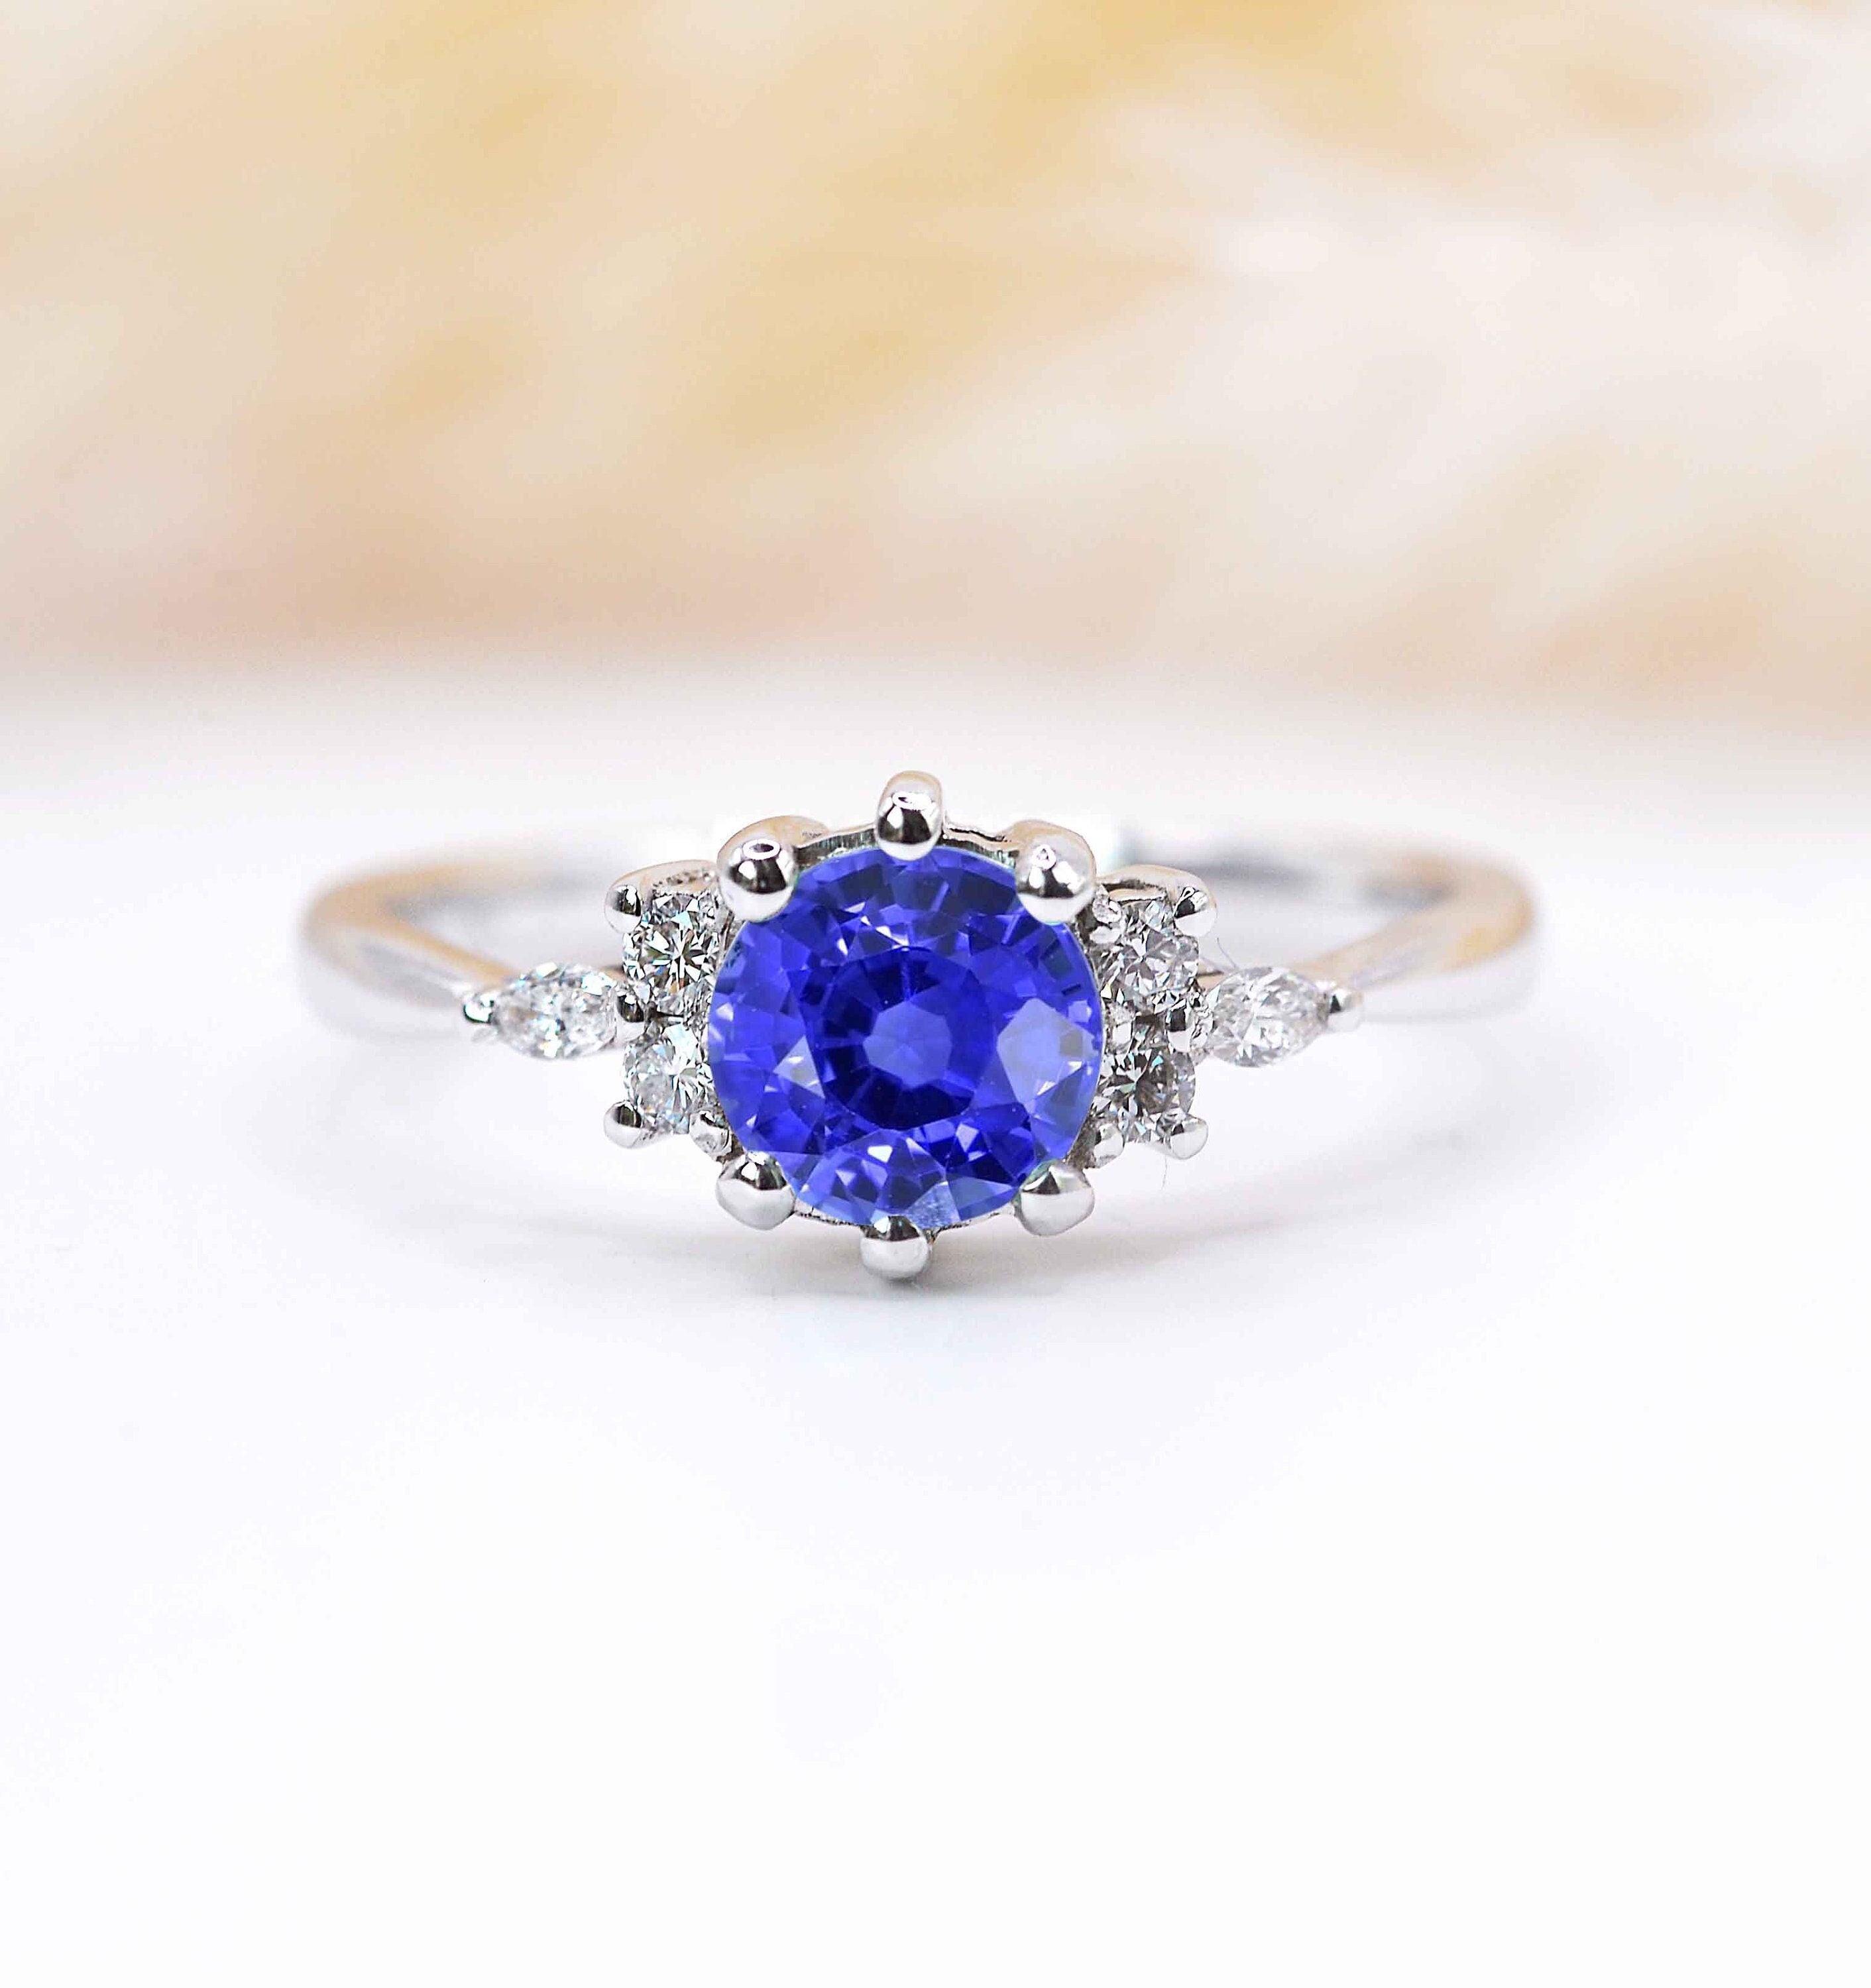 Blue Sapphire & Diamond Delicate Ring | Natural Featuring Art Deco Solid White Gold Celebrity Vintage Stylish